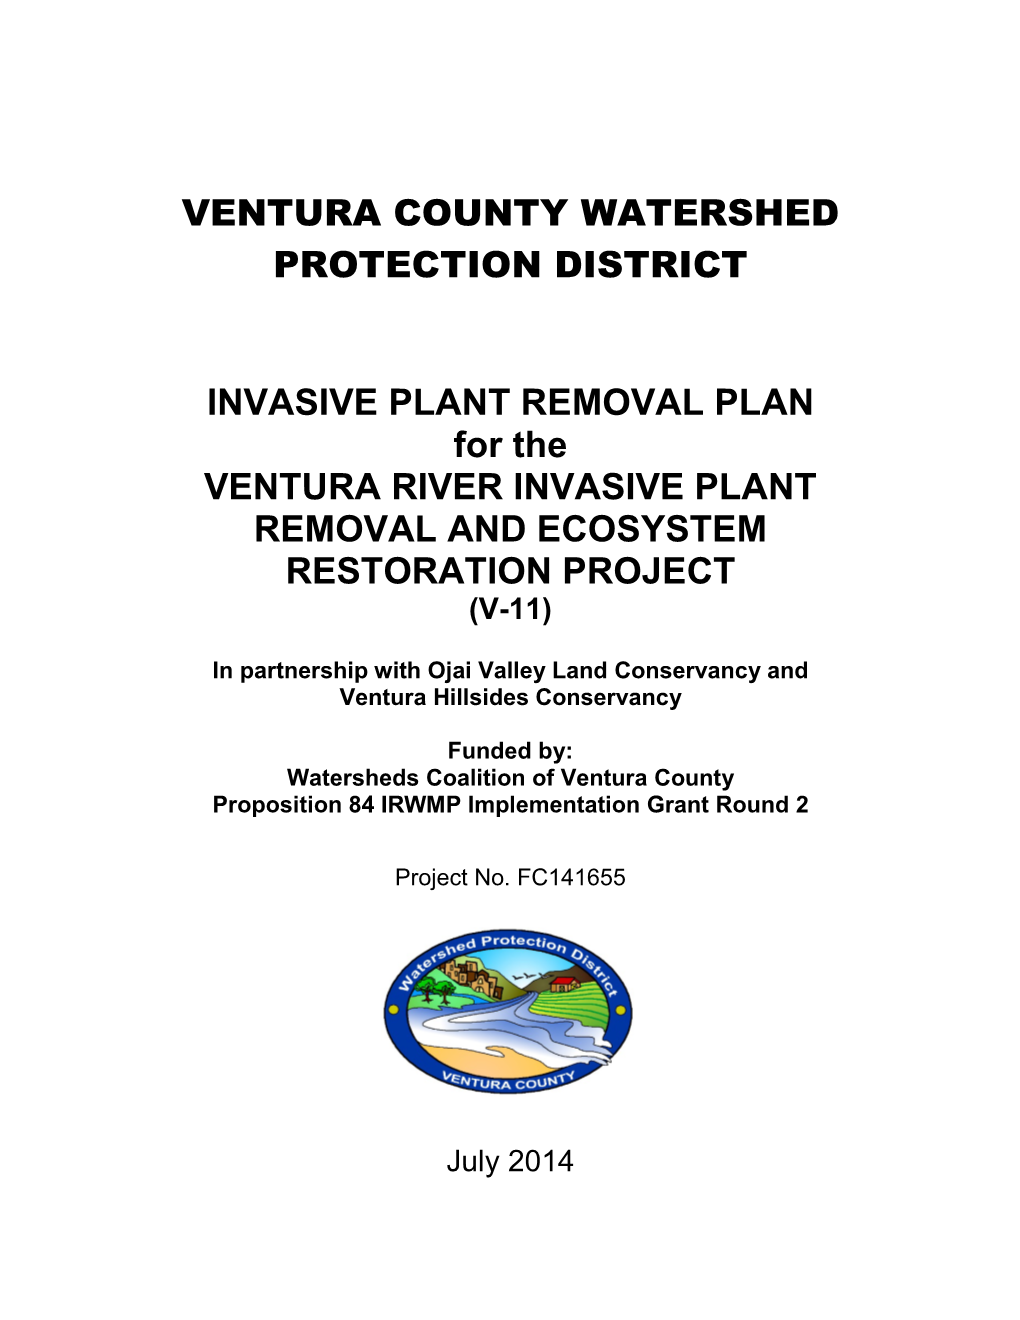 Ventura County Watershed Protection District Invasive